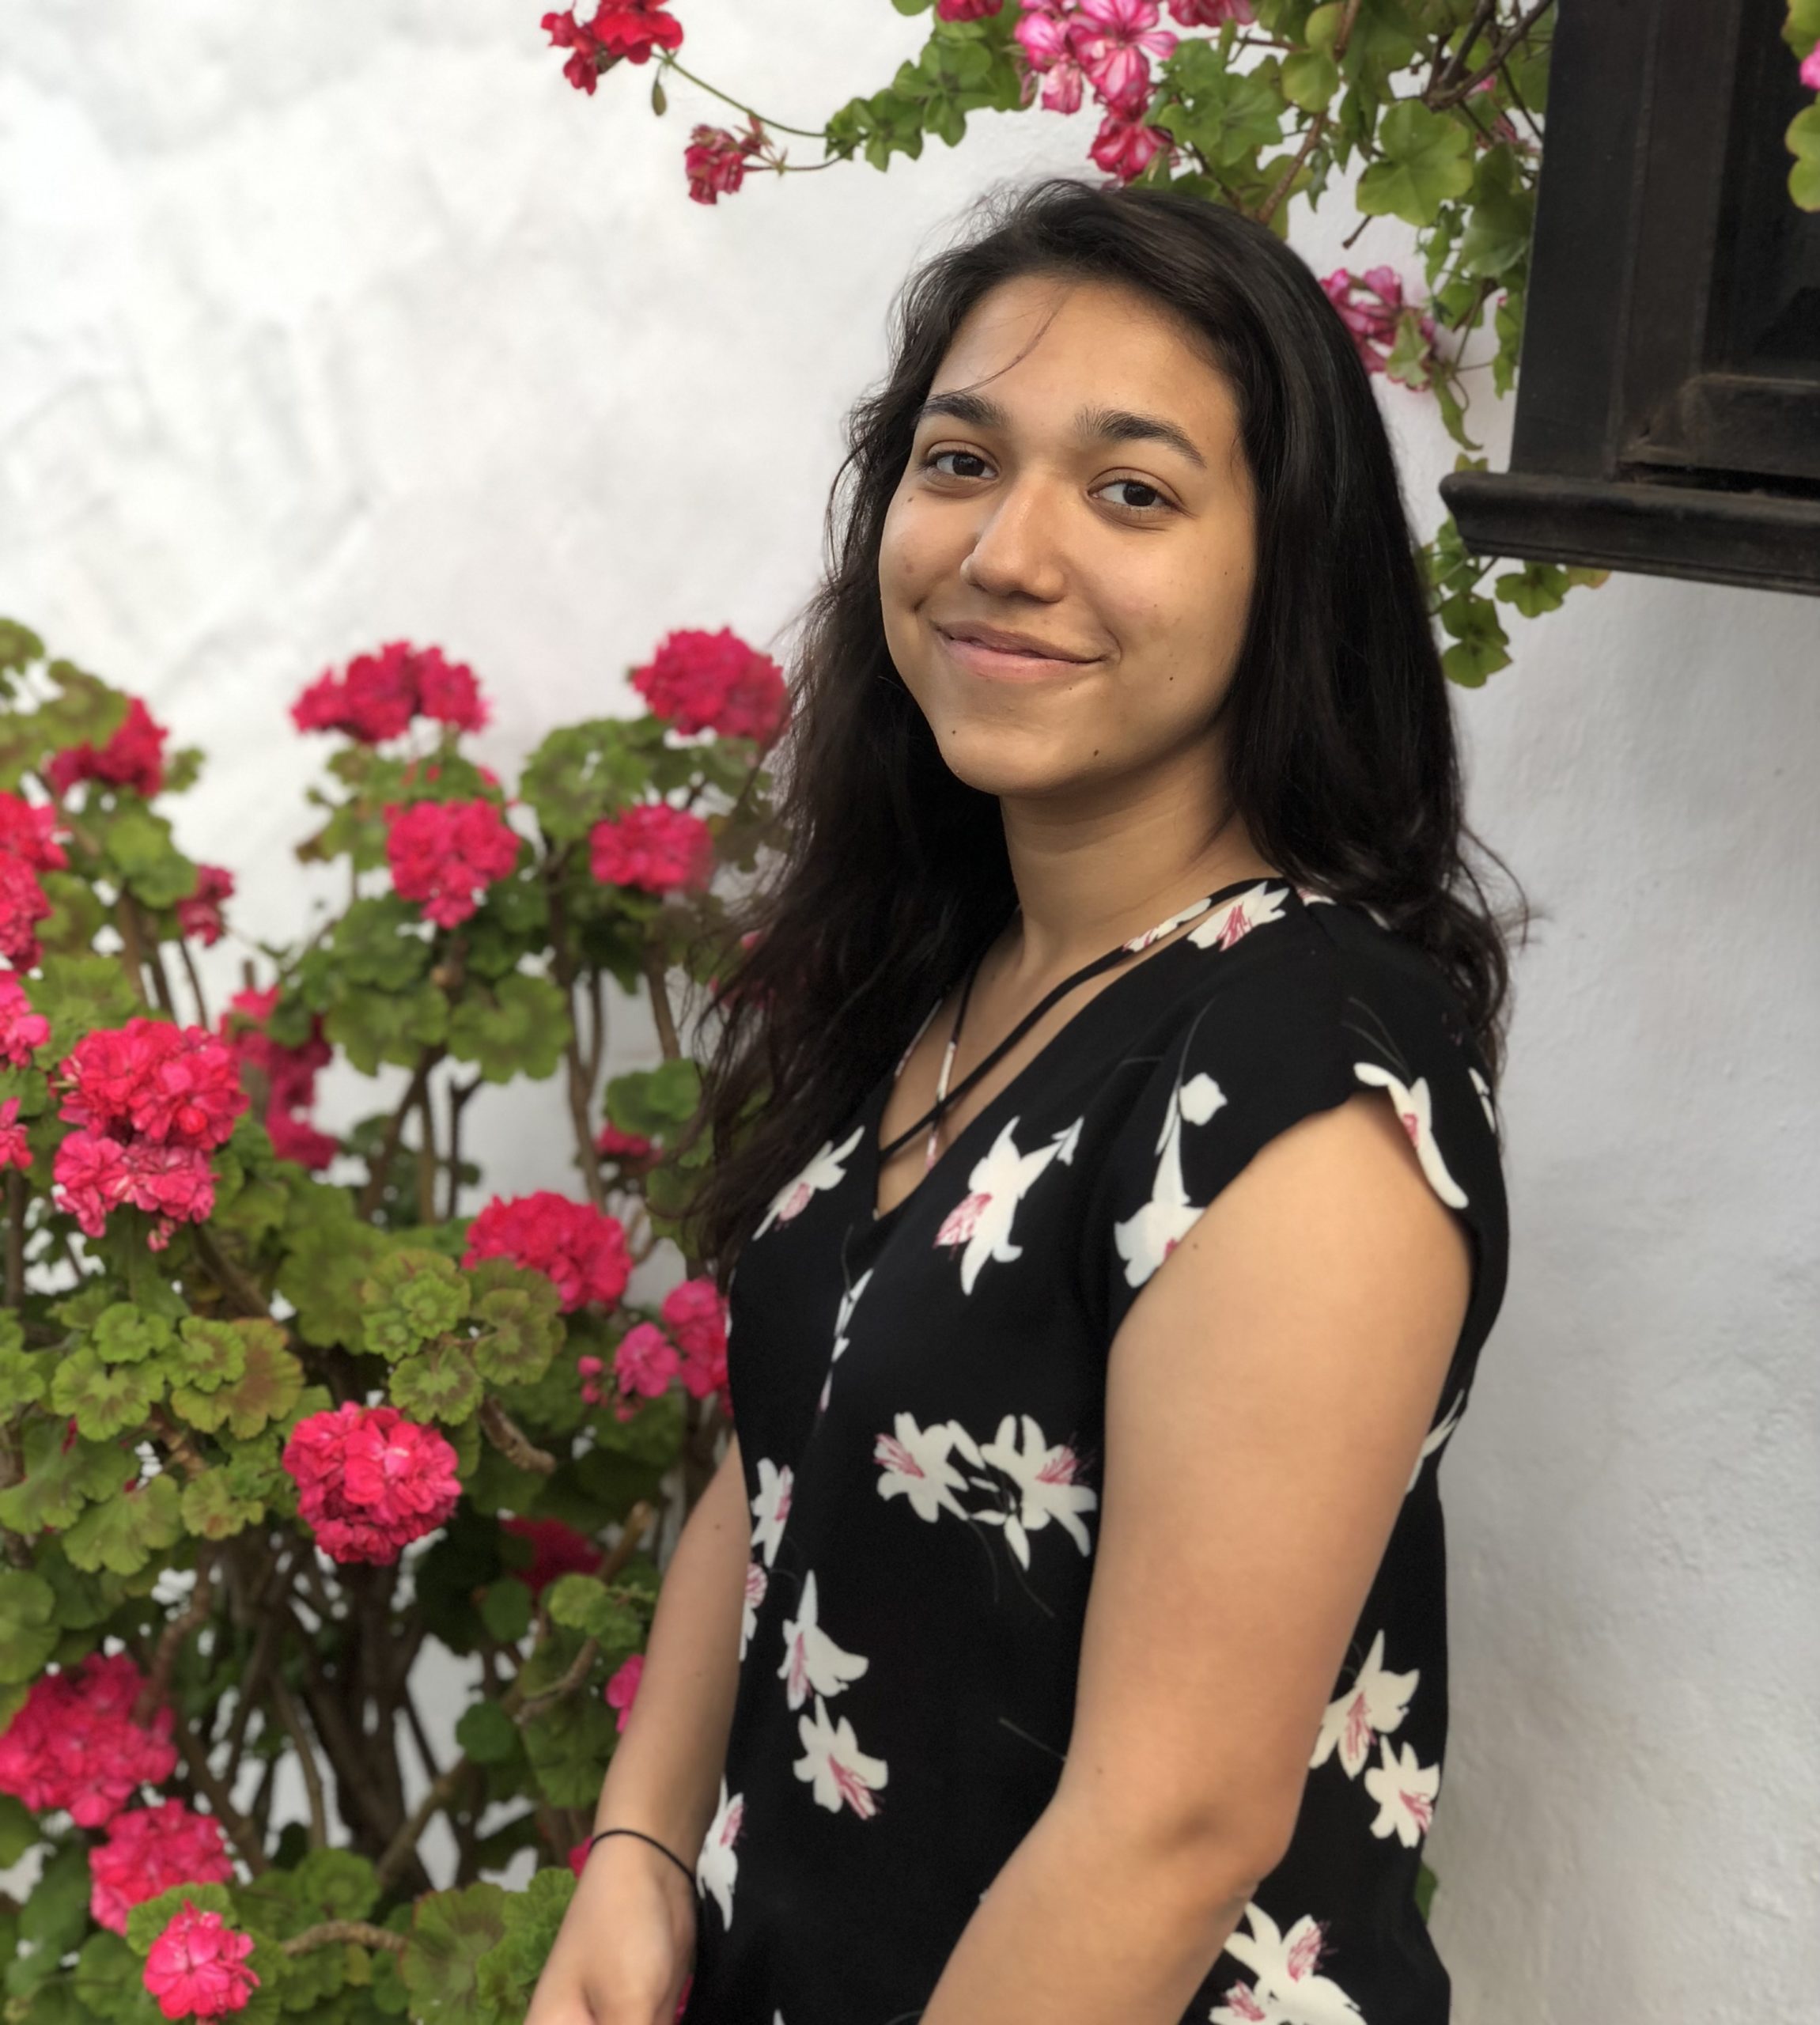 November 2021 Public Administration and Policy MPA Student of the Month: Nira Marte